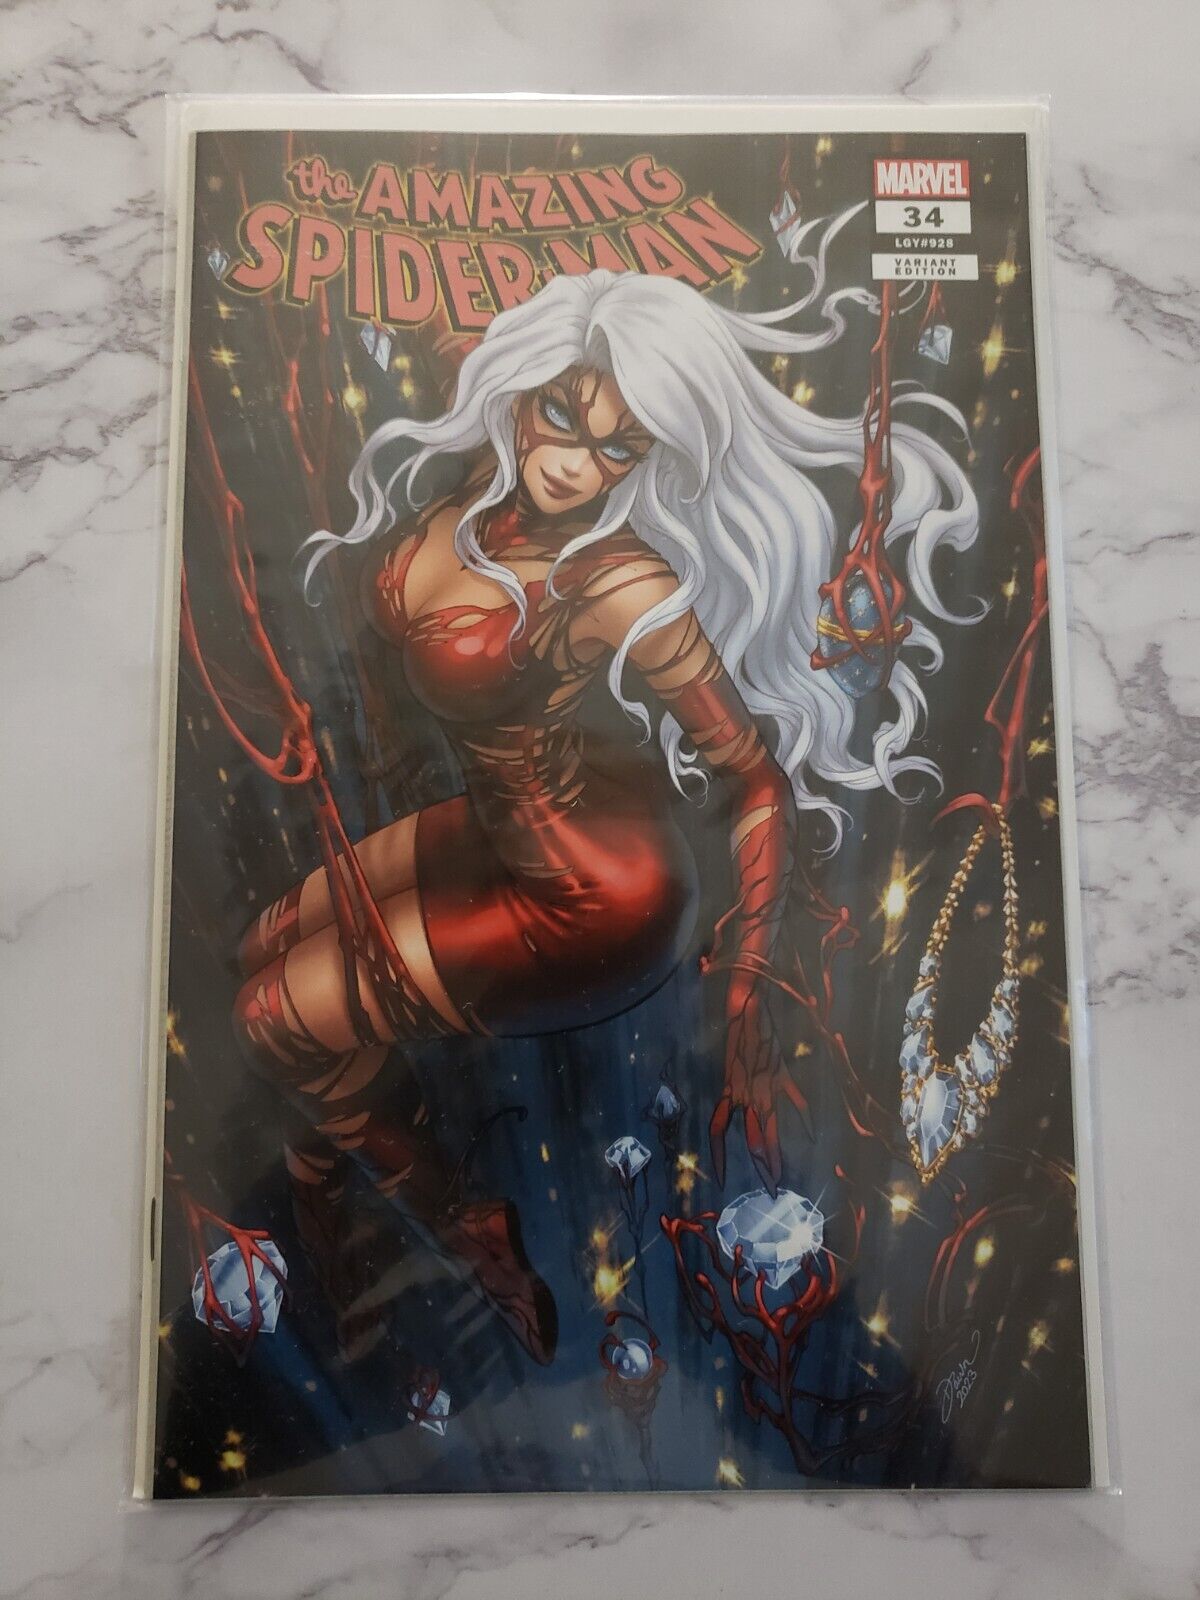 The Amazing Spider-Man #34 Dawn McTeigue Trade Dress Cover (A) Marvel Comics